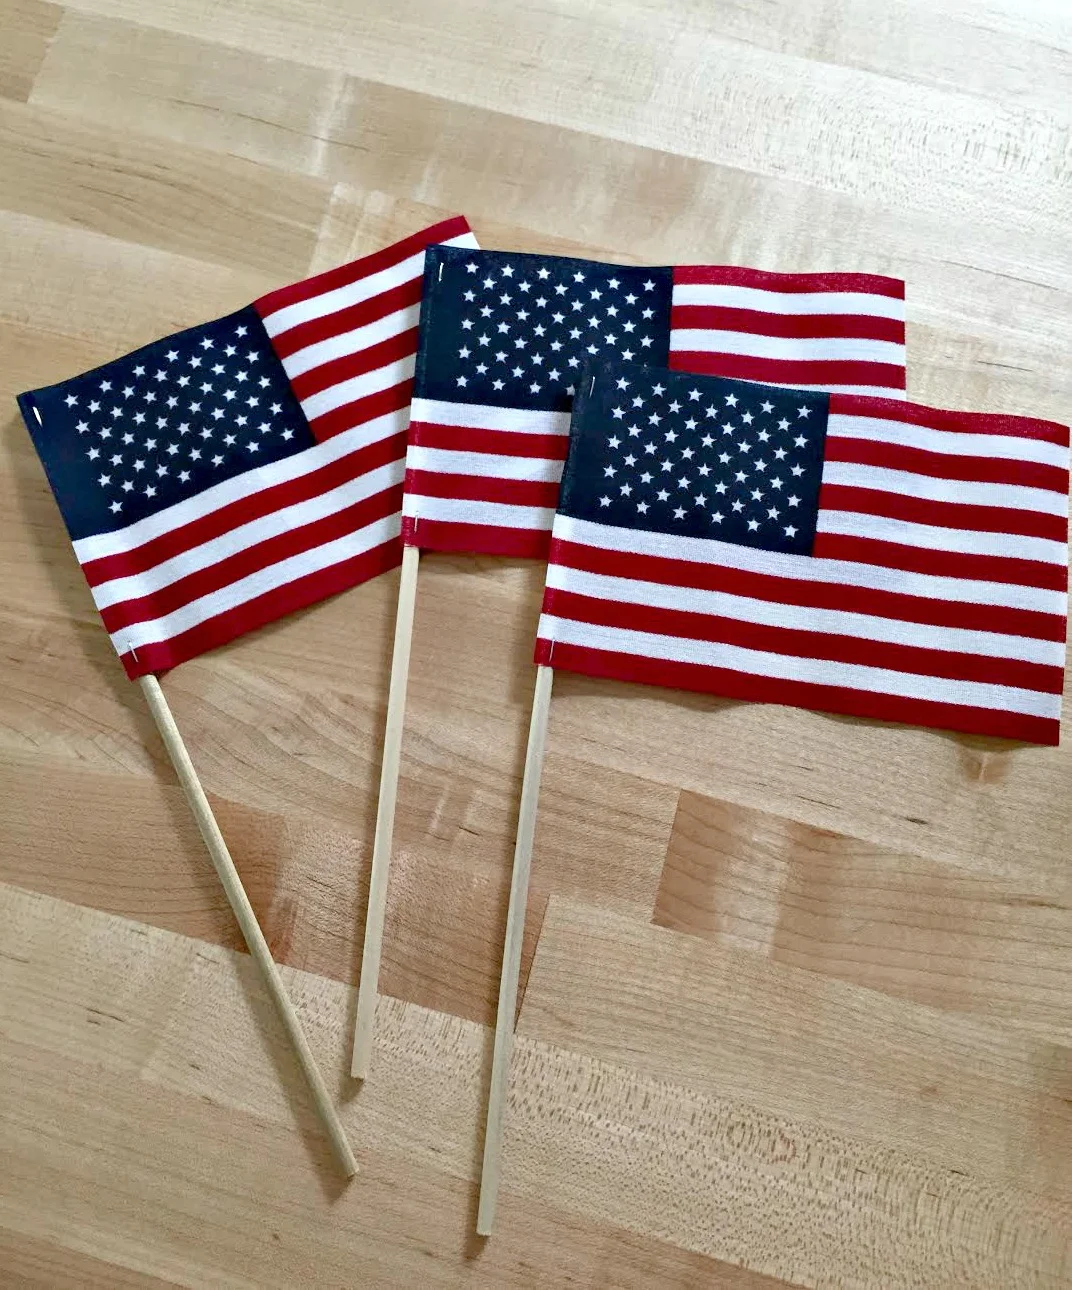 crafts with small USA flags